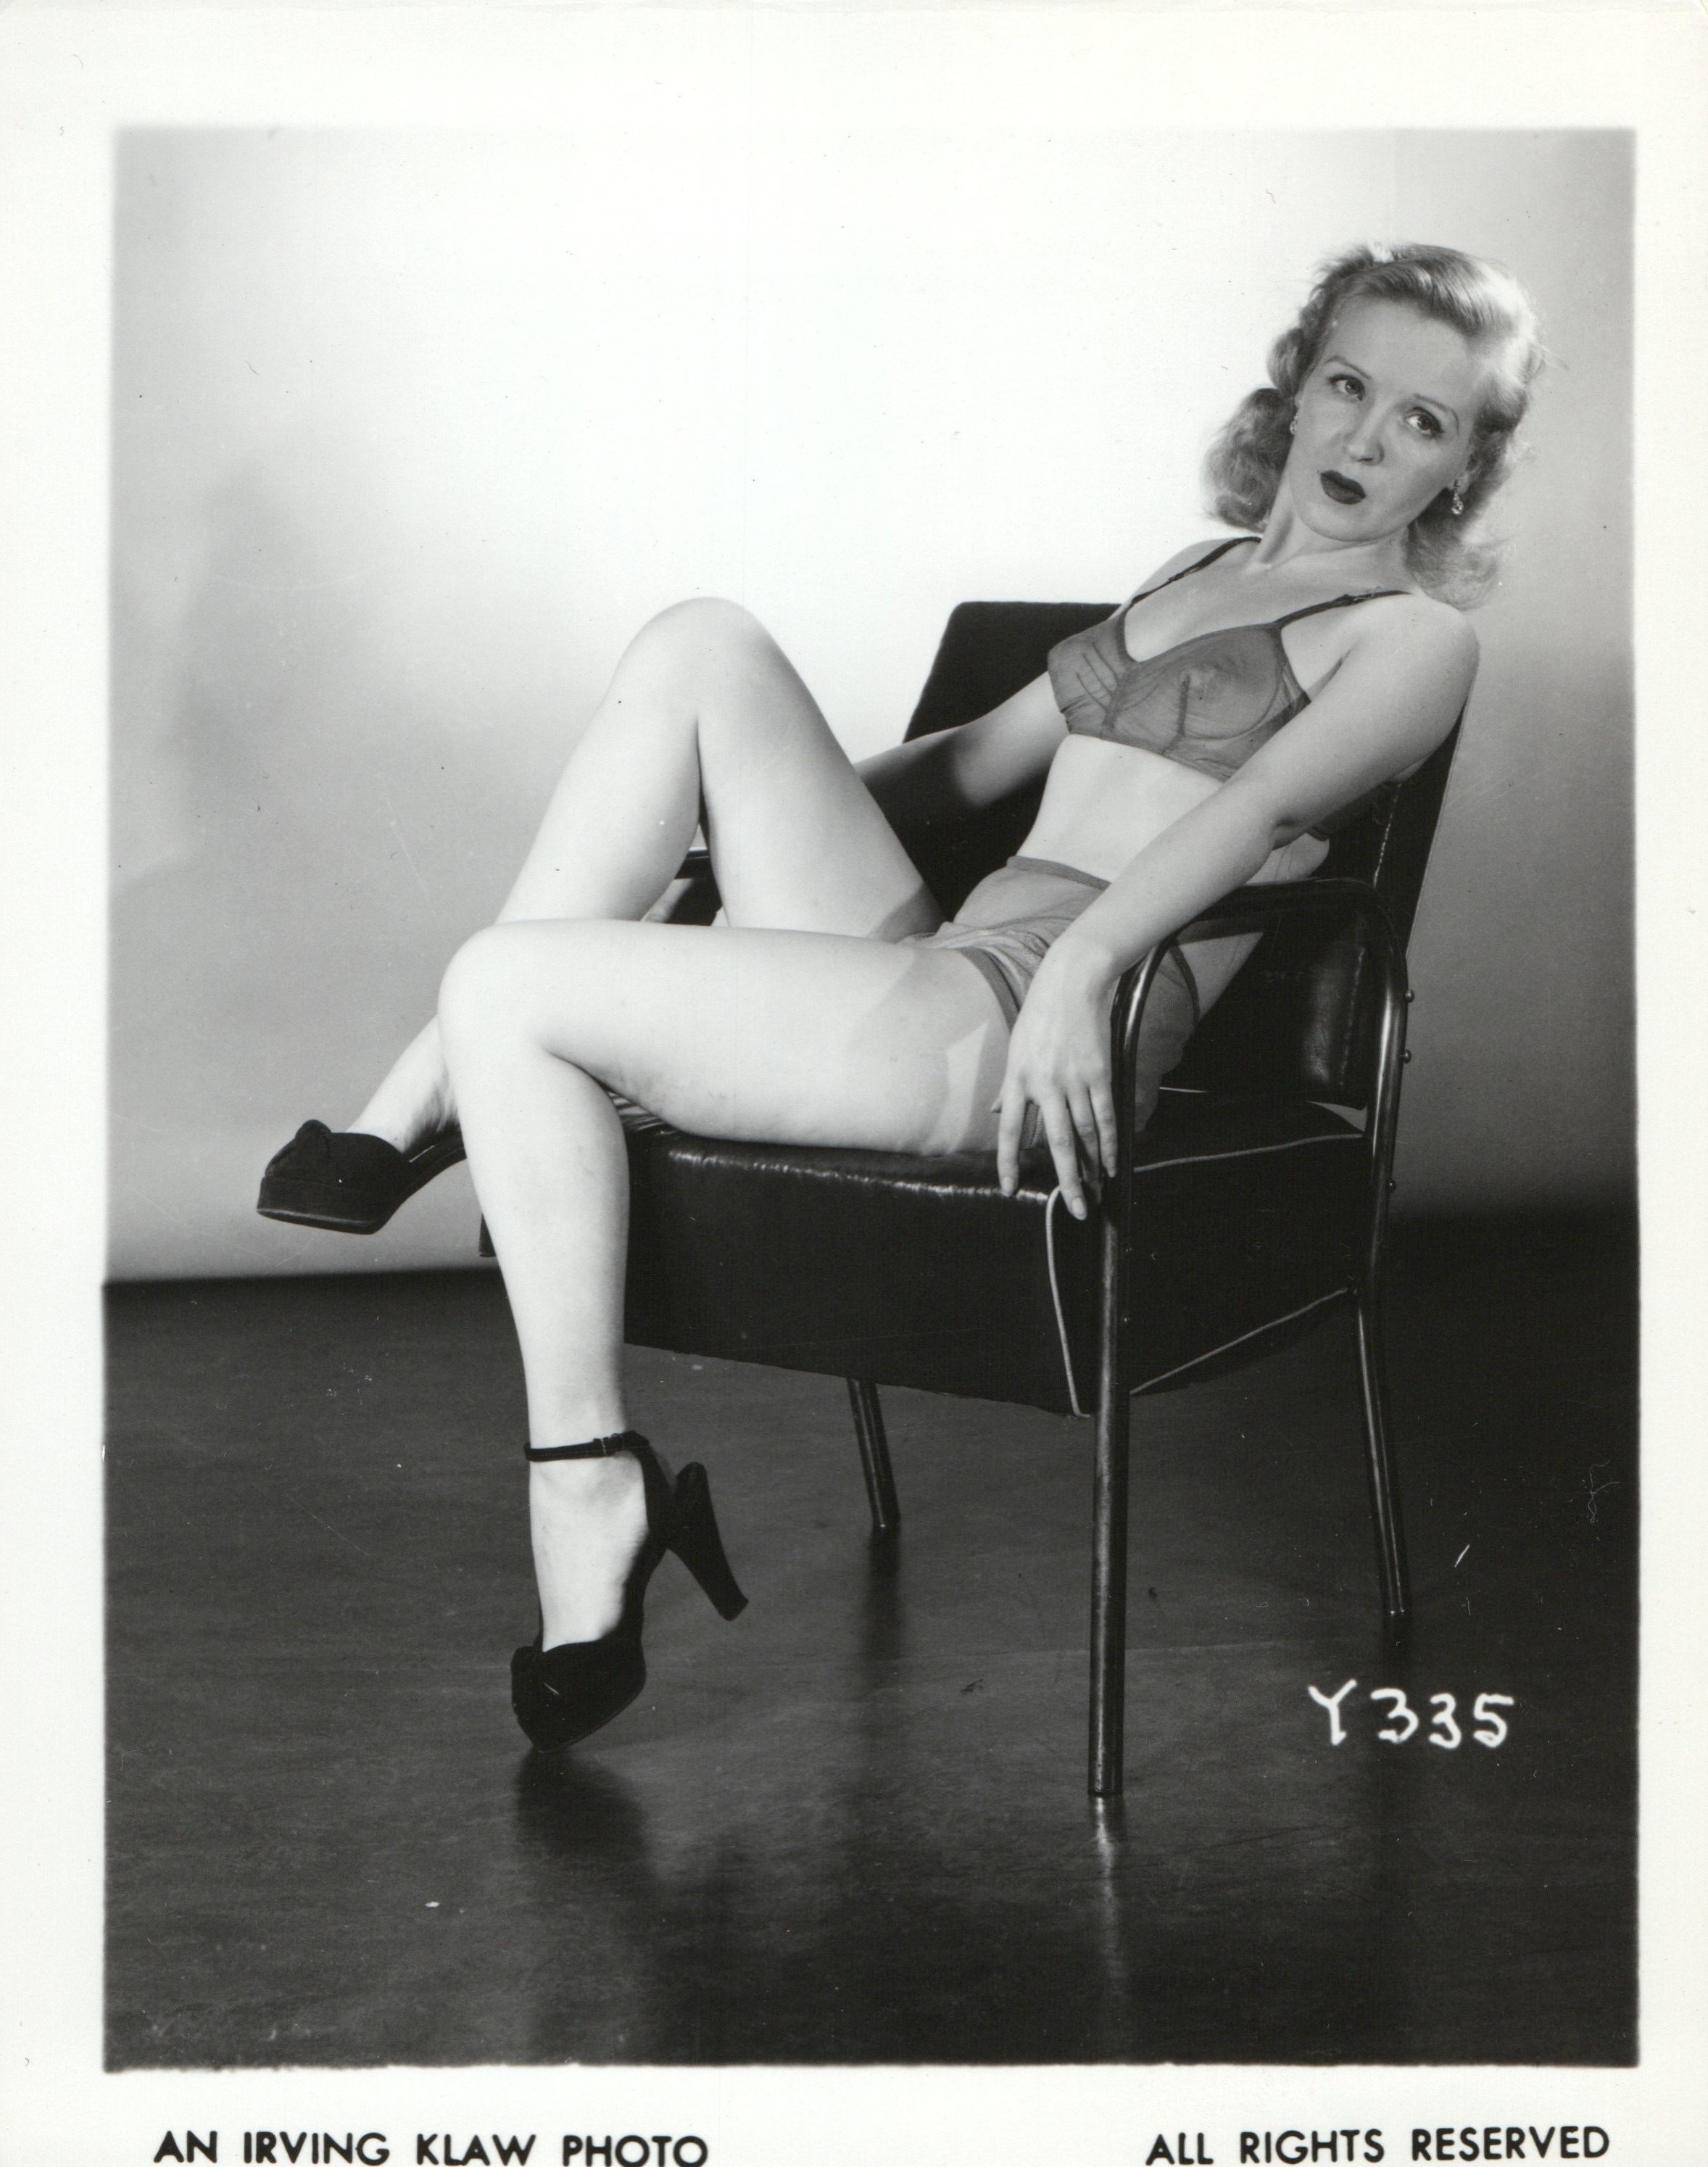 4 X 5 ORIGINAL PIN UP PHOTO FROM IRVING KLAW ARCHIVES OF MODEL SHEENAH  #61 